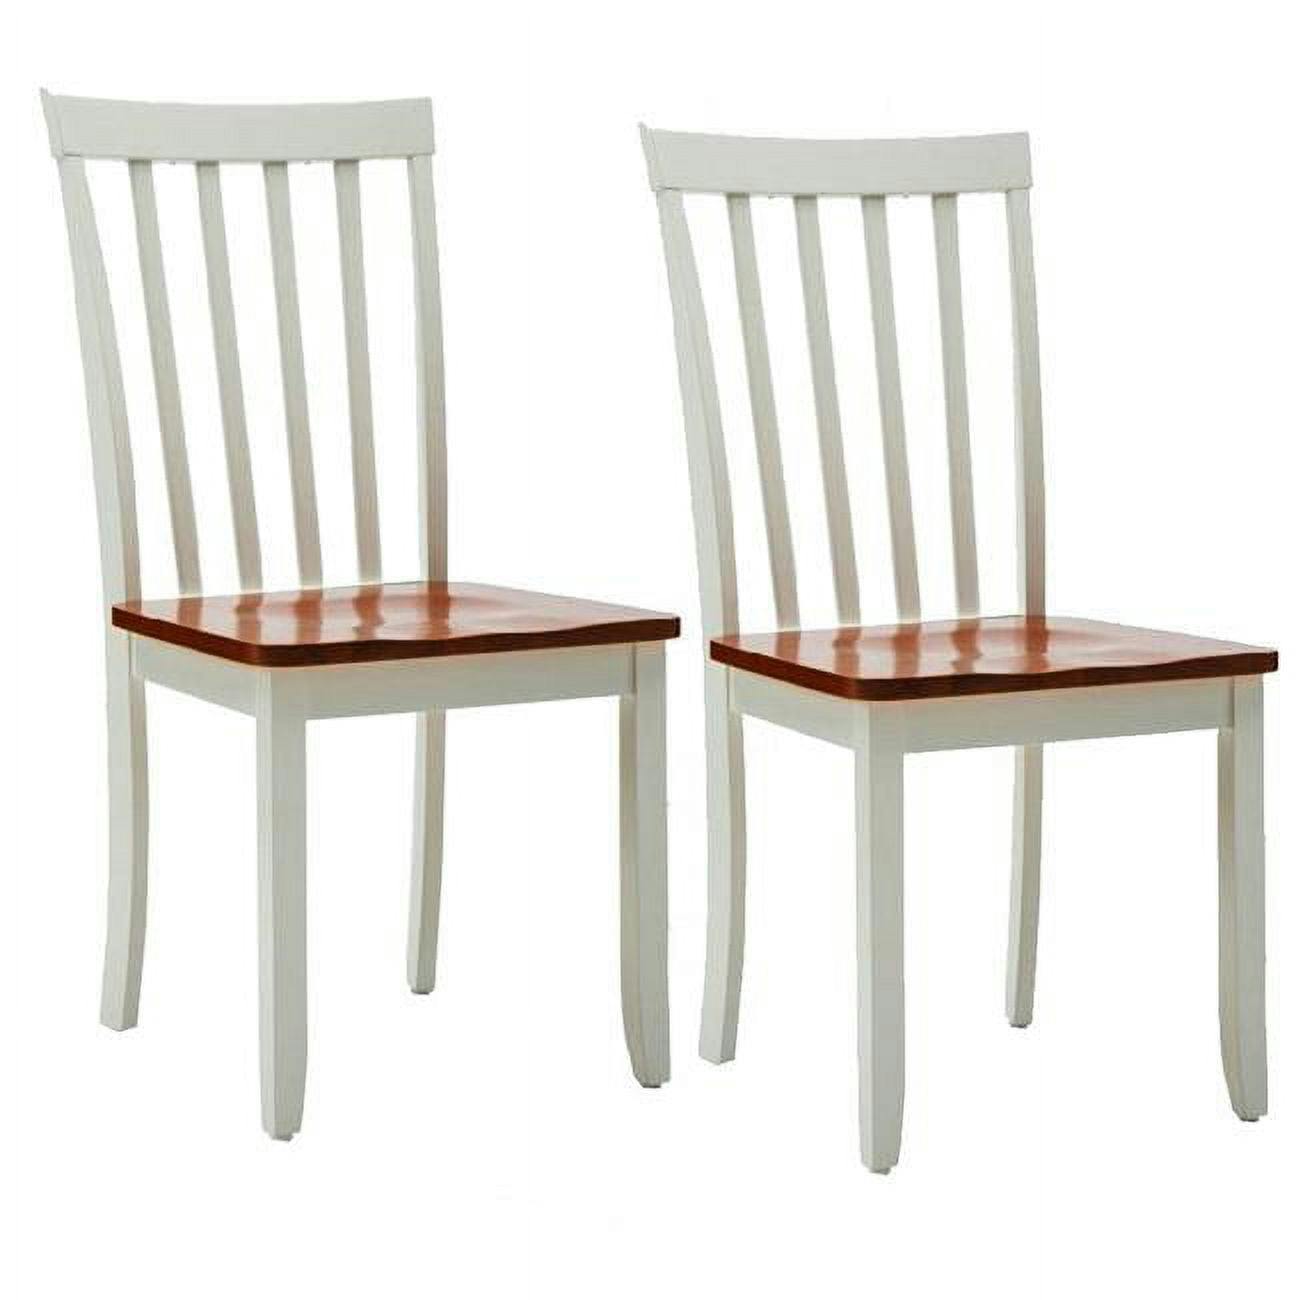 Parsons High Slat Side Chair in White - Solid Wood Construction